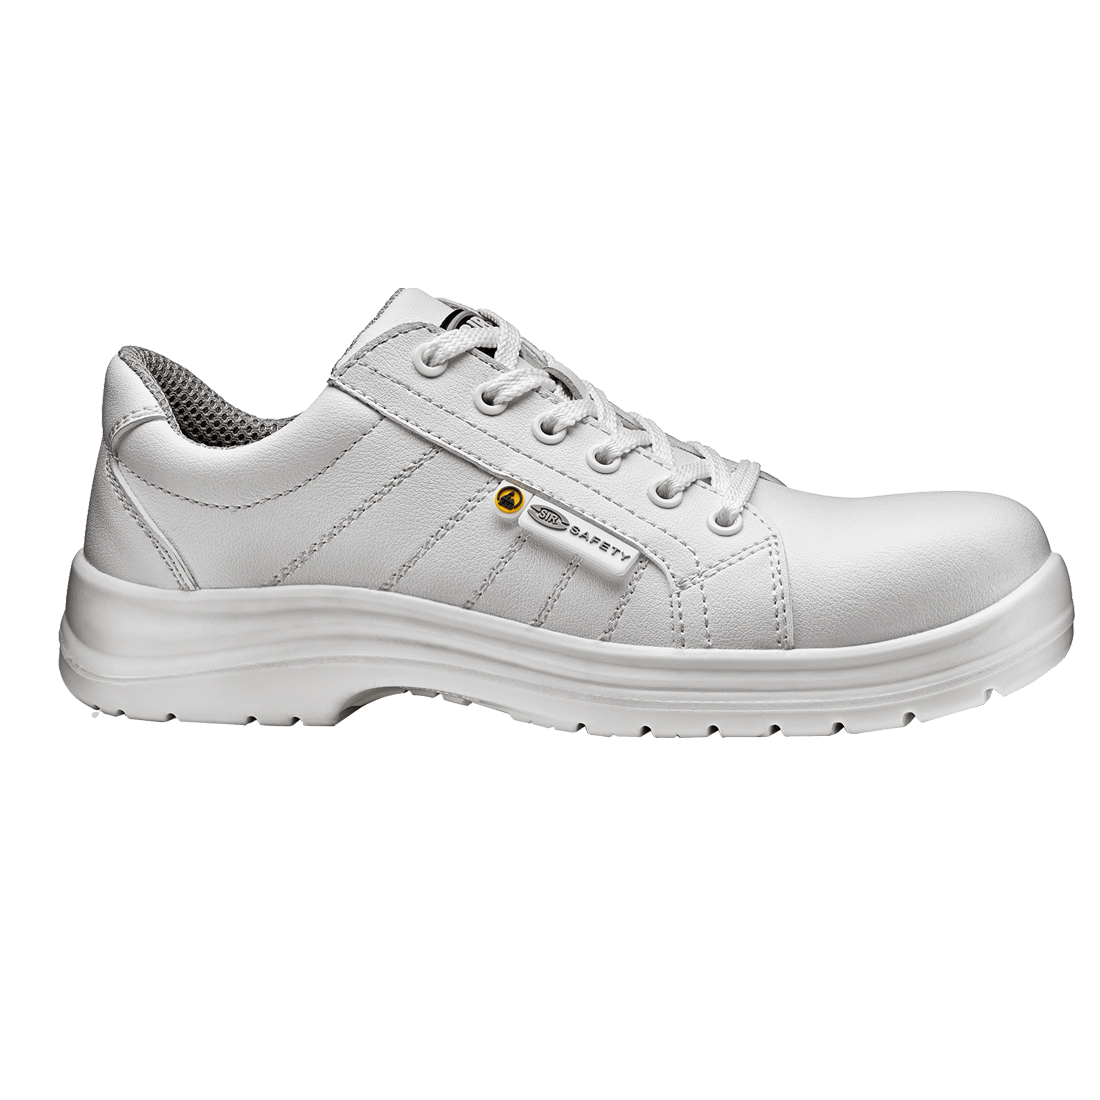 Sir System SHOE | LOW WHITE Safety FOBIA